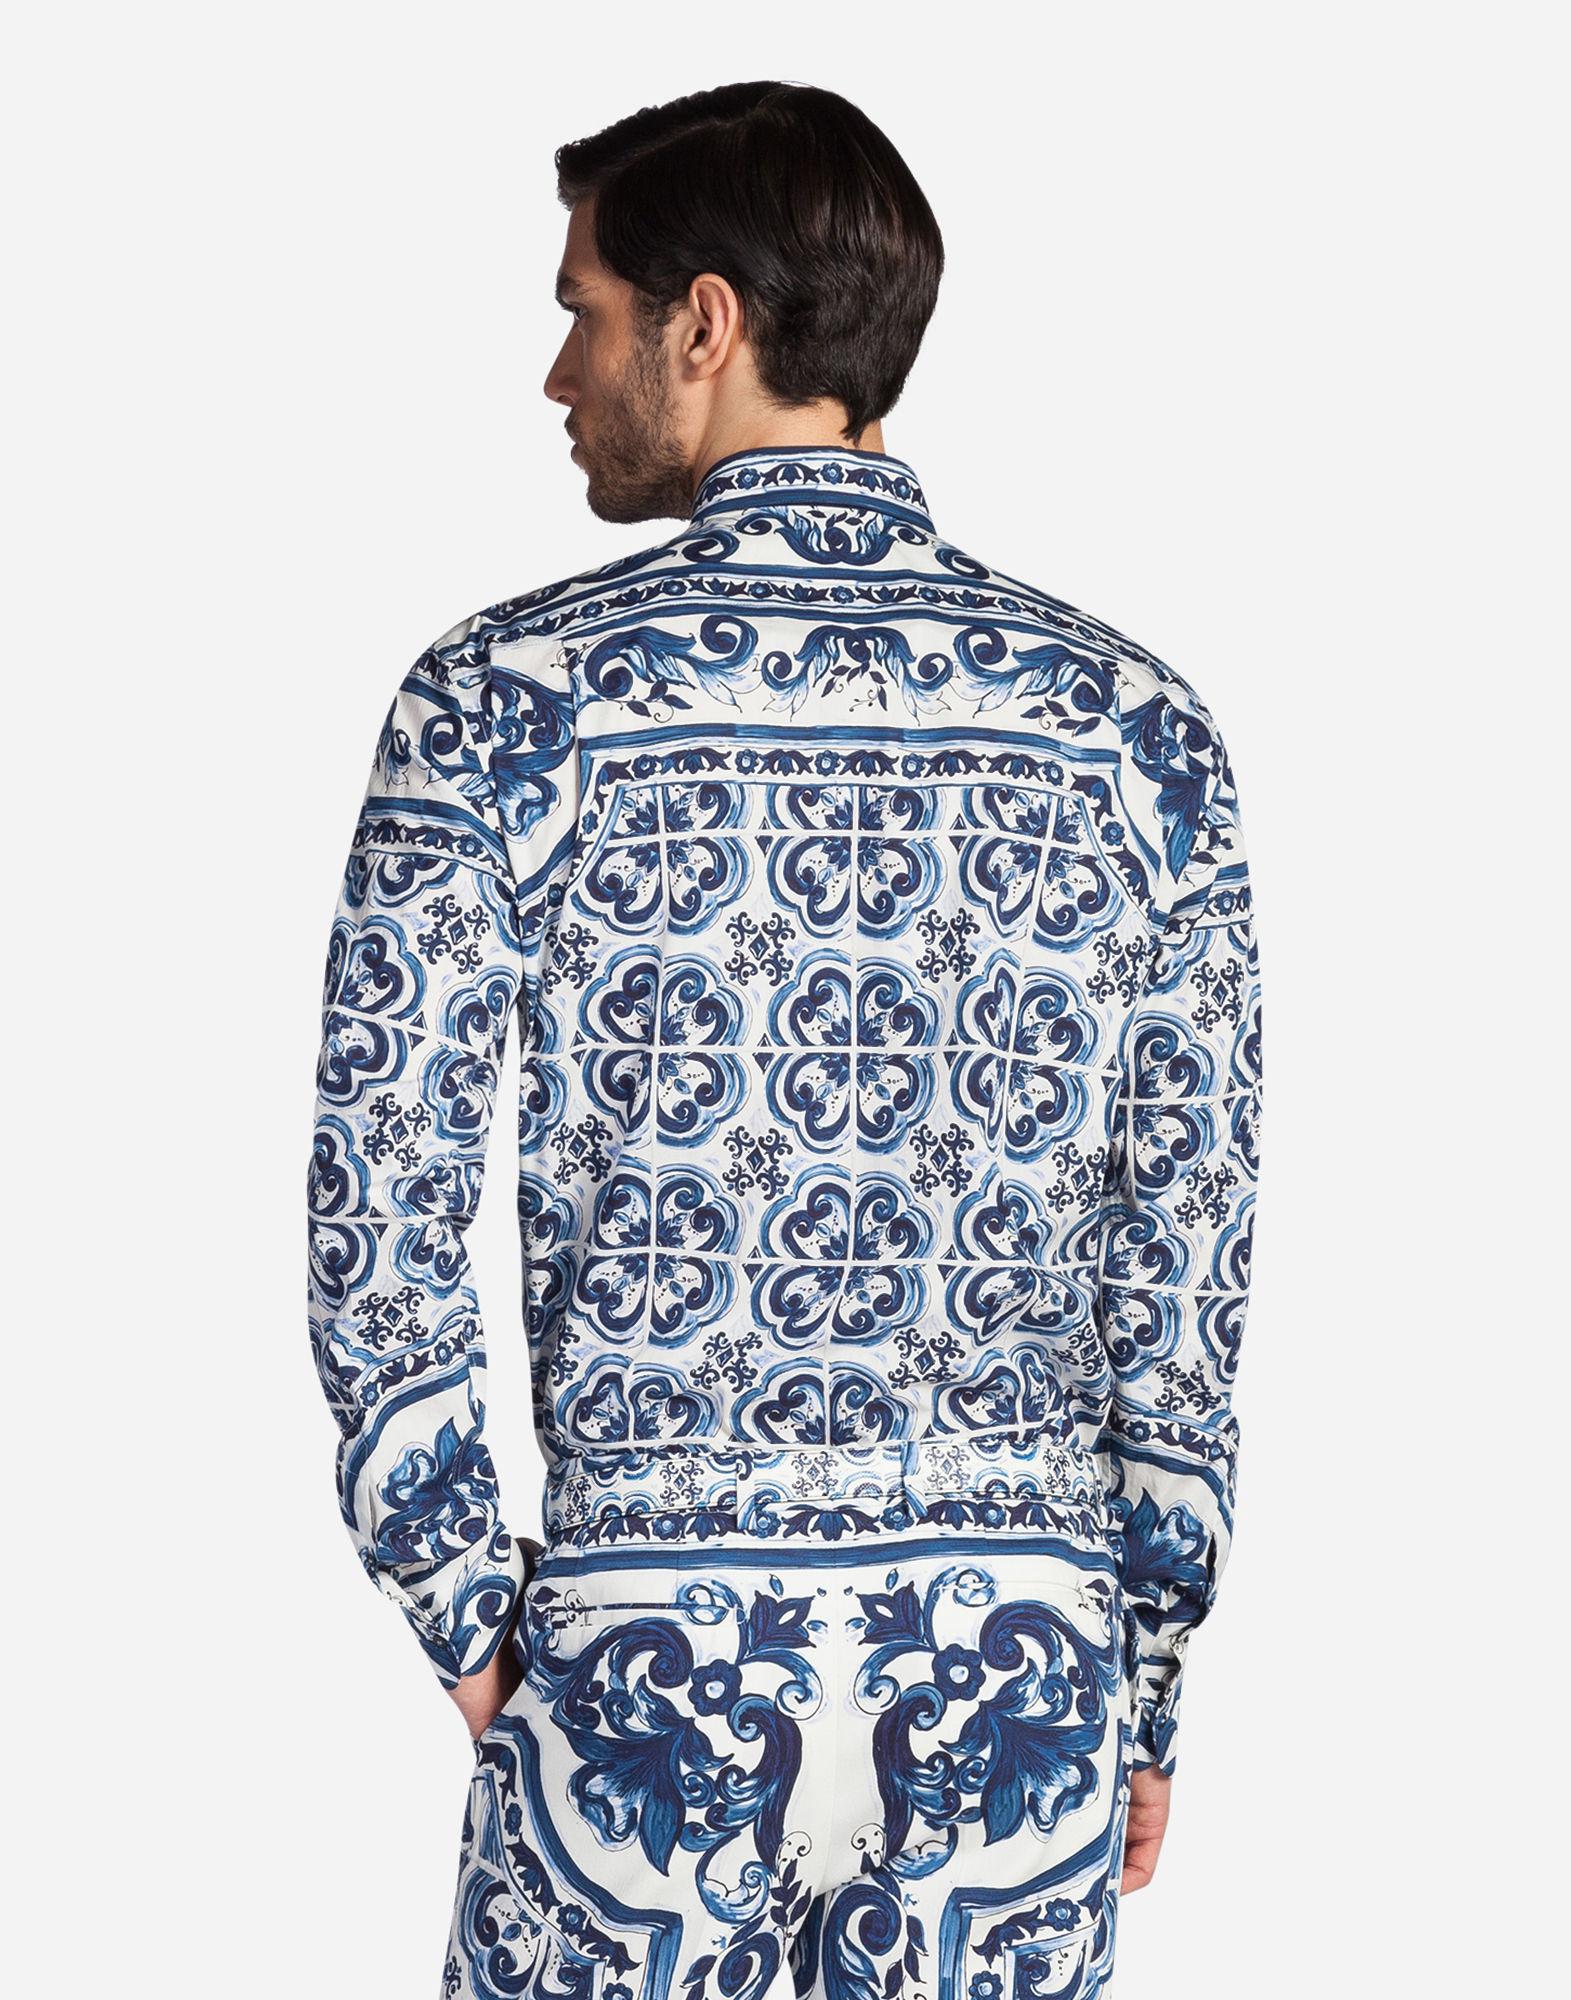 Dolce & Gabbana Cotton Paisley Printed Shirt in Blue for Men - Lyst